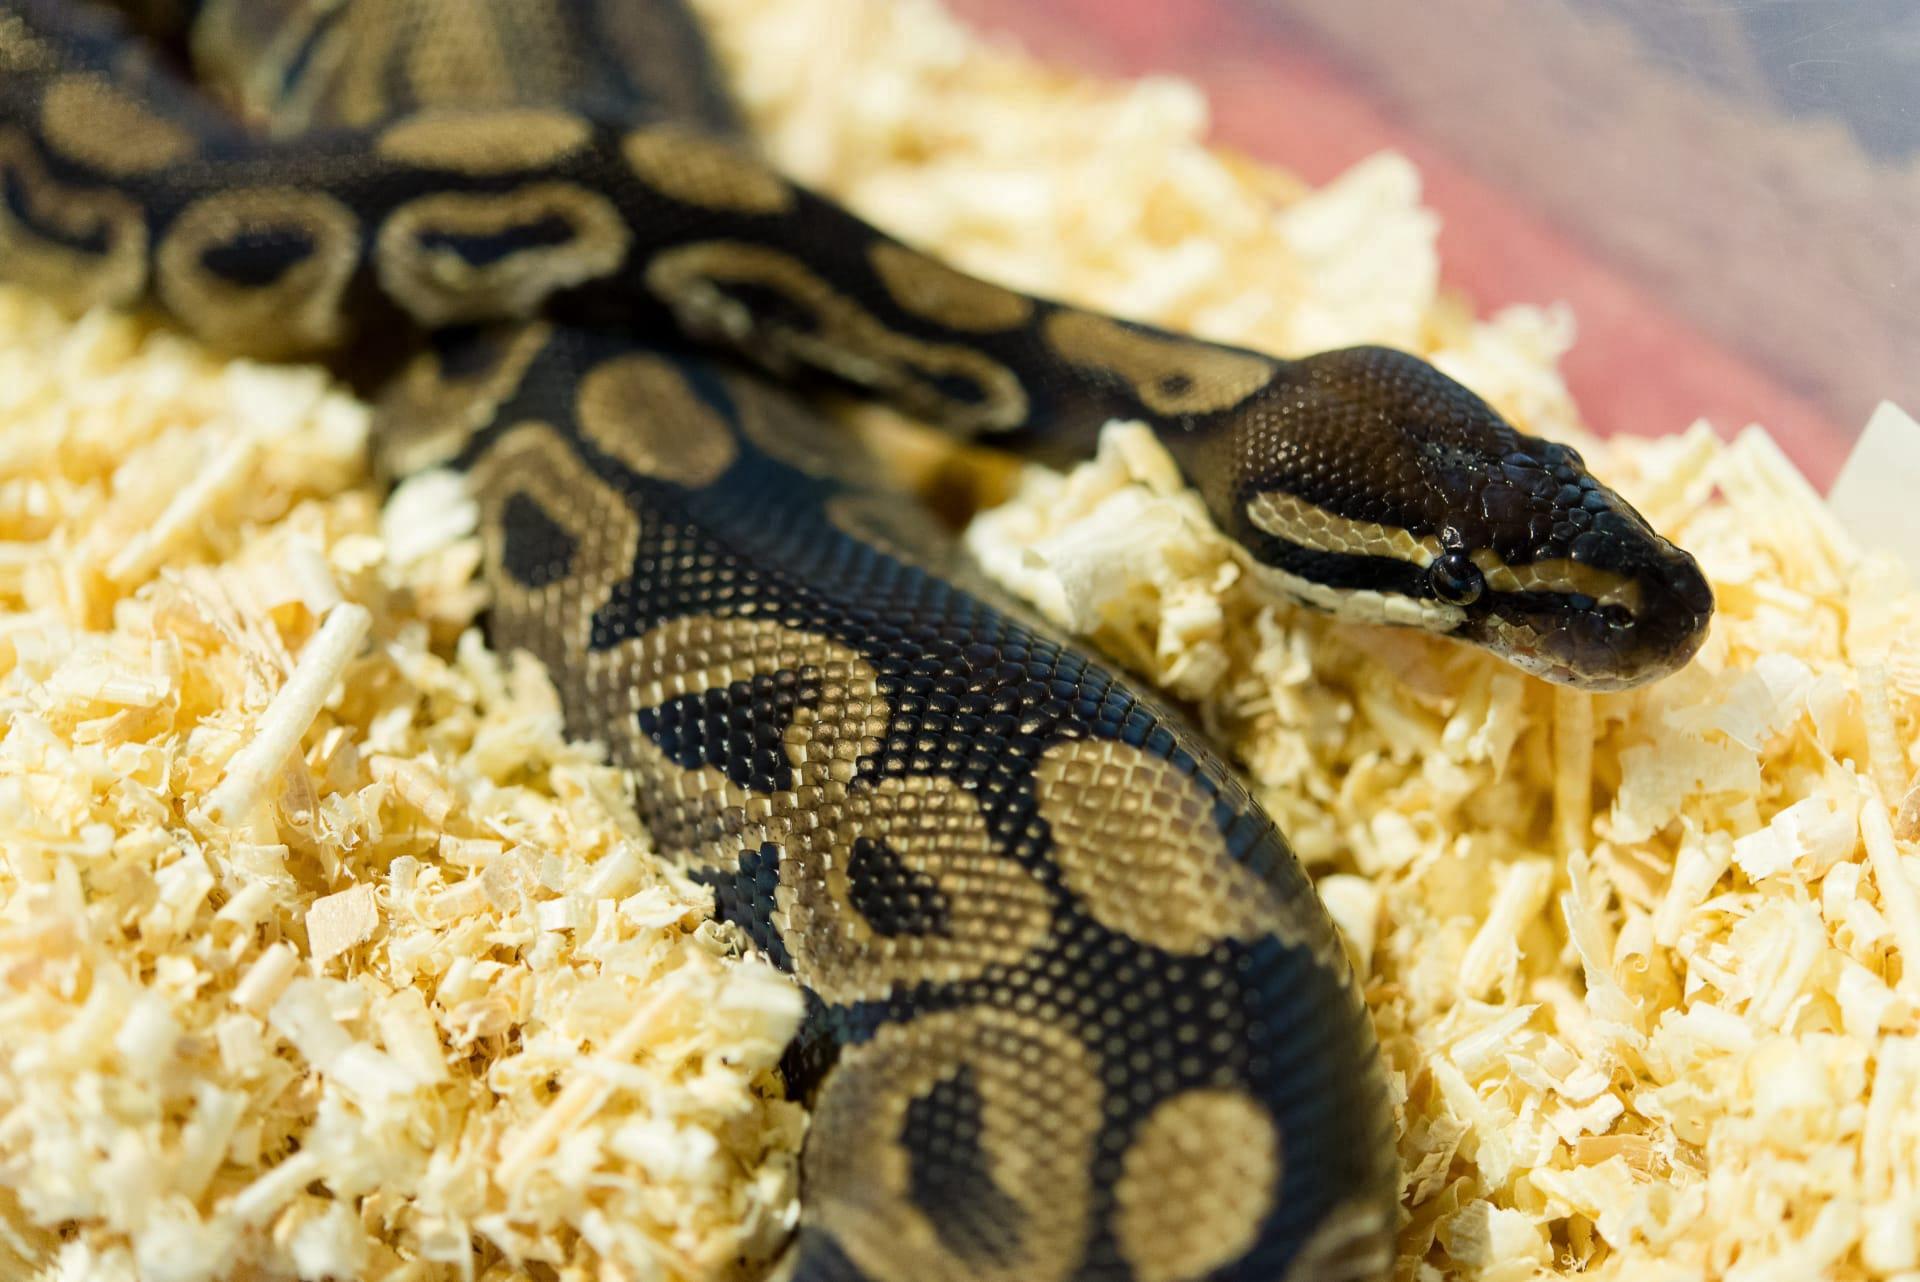 Burmese python pictures